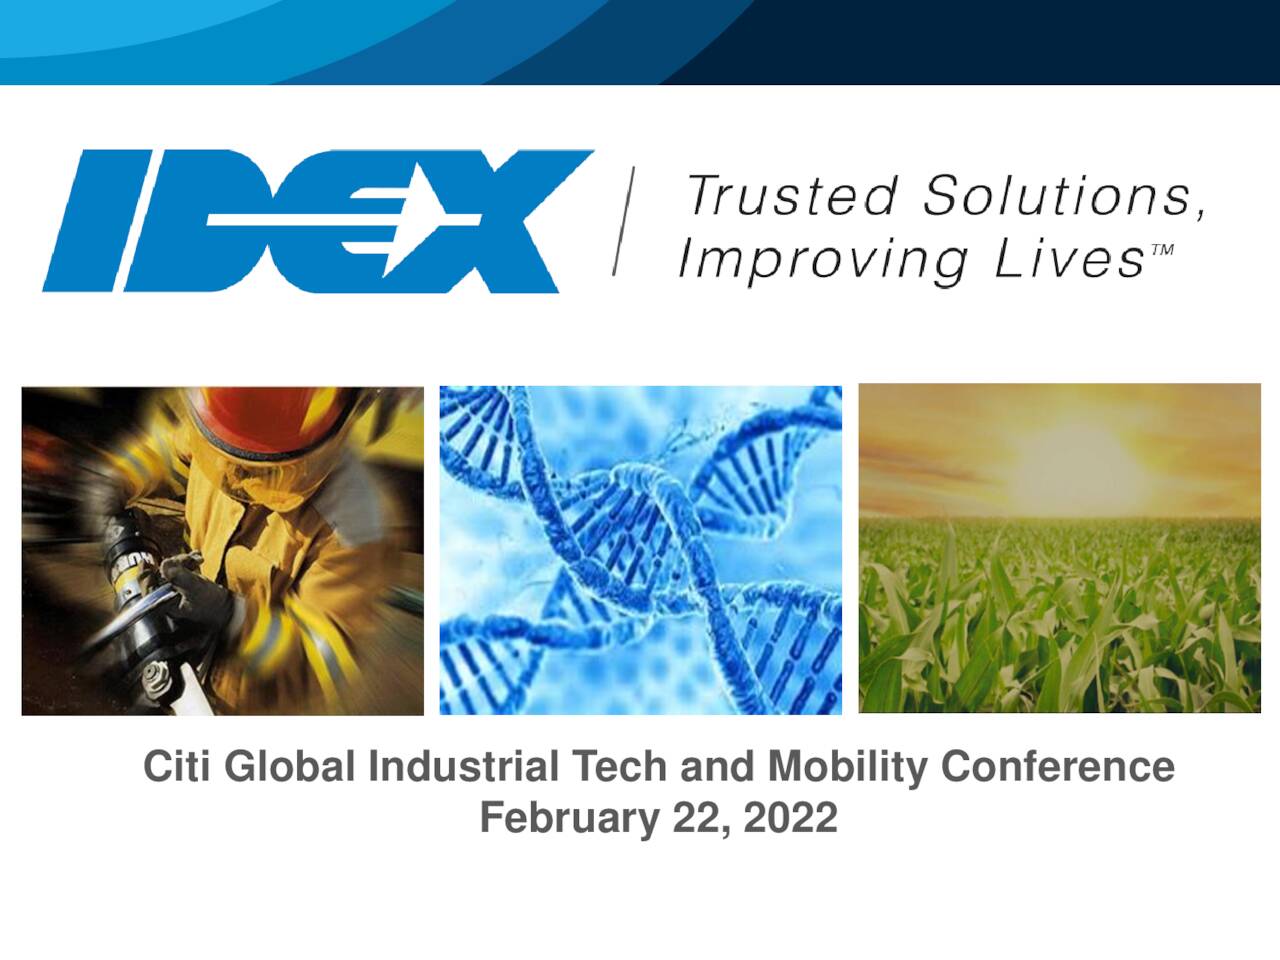 IDEX Corporation (IEX) Presents at the Citi Global Industrial Tech and